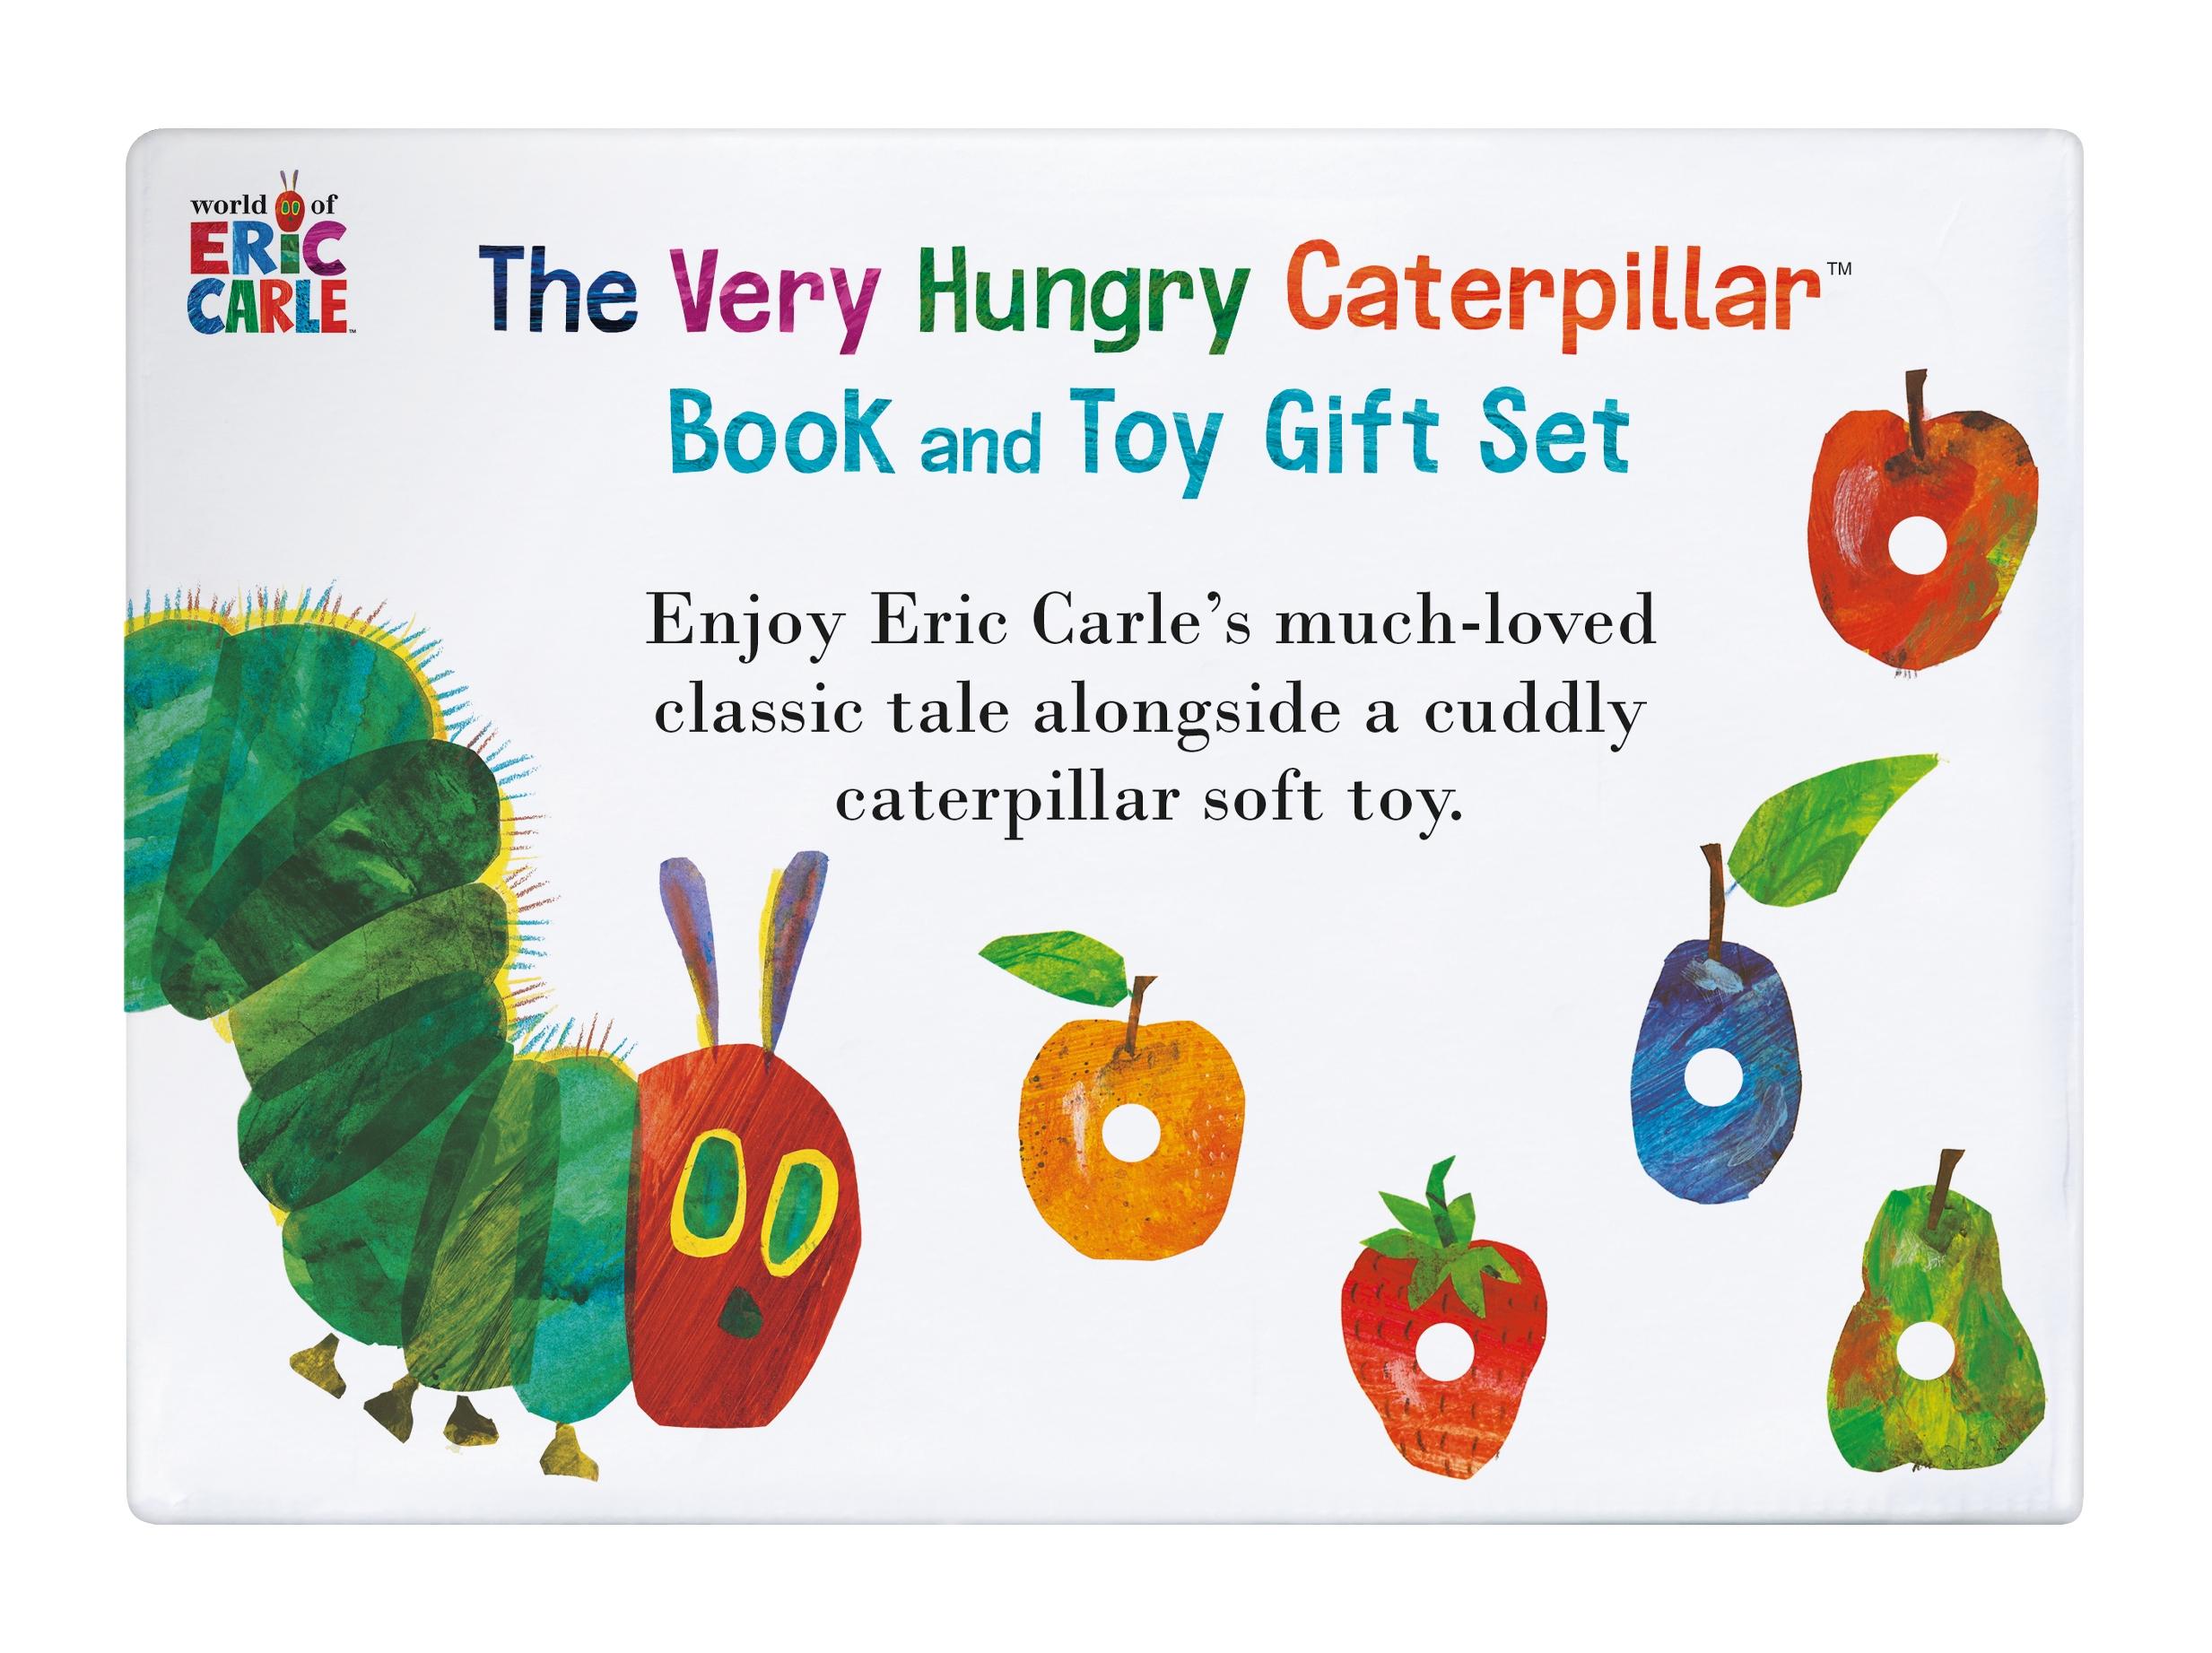 The Very Hungry Caterpillar. Book and Plush-Toy | Eric Carle | Buch | Englisch | 2014 | Penguin Books Ltd (UK) | EAN 9780723297857 - Carle, Eric